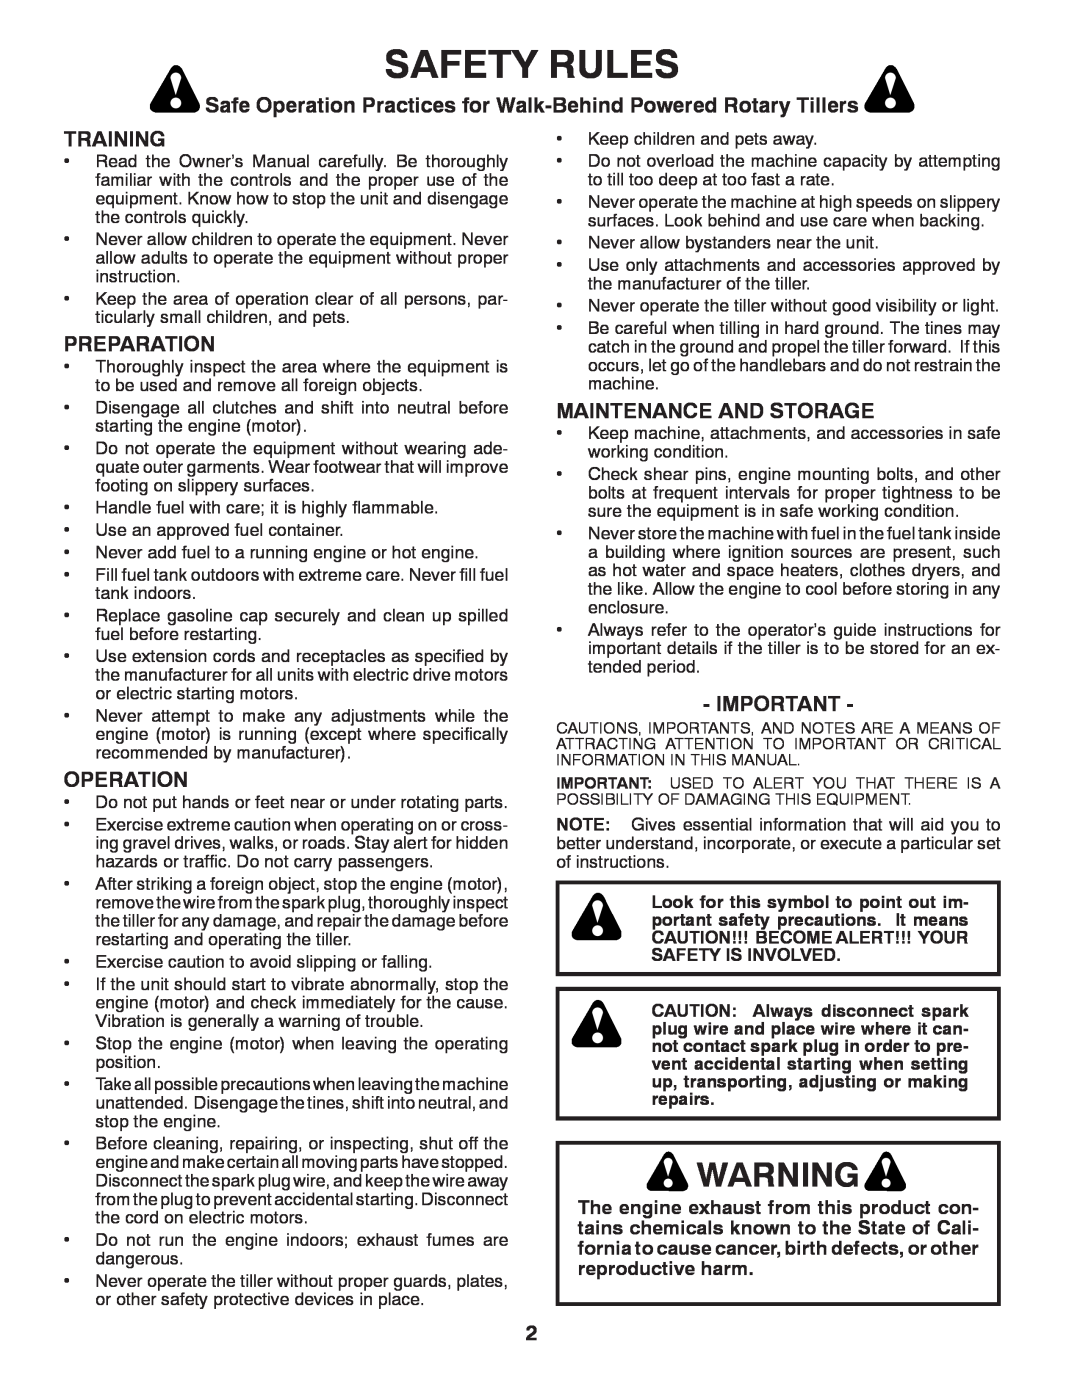 Poulan 413288 manual Safety Rules, Safe Operation Practices for Walk-Behind Powered Rotary Tillers, Training, Preparation 